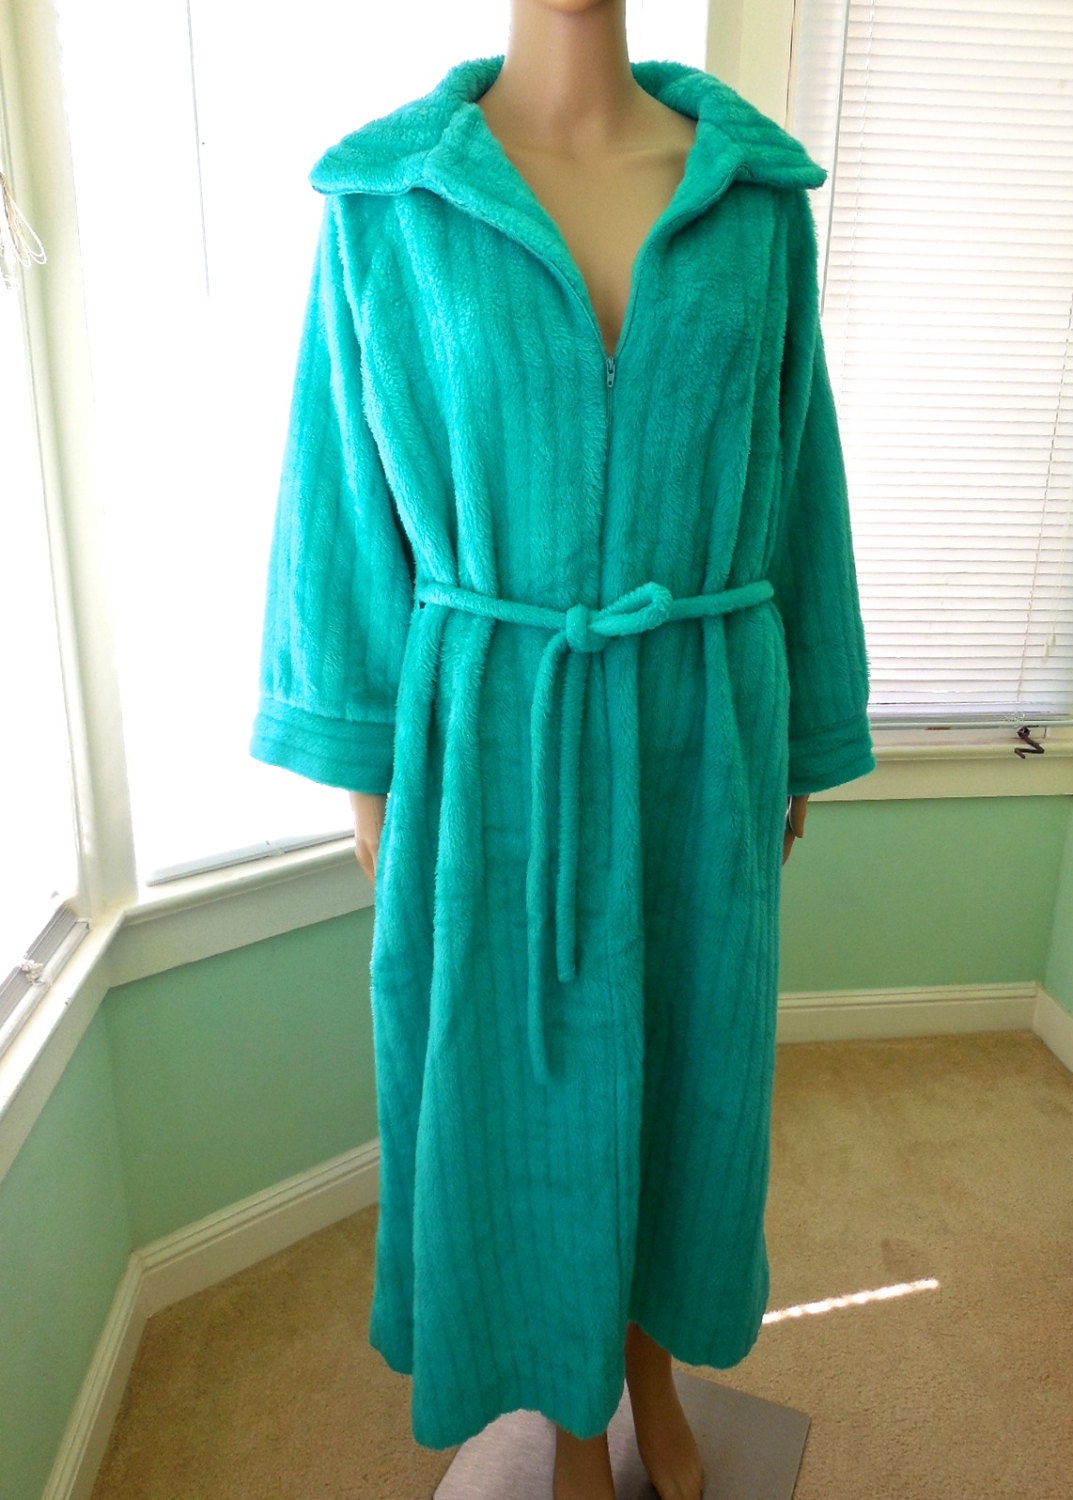 Vintage MONTGOMERY WARD House Robe Womens Robe by SeadawlVintage